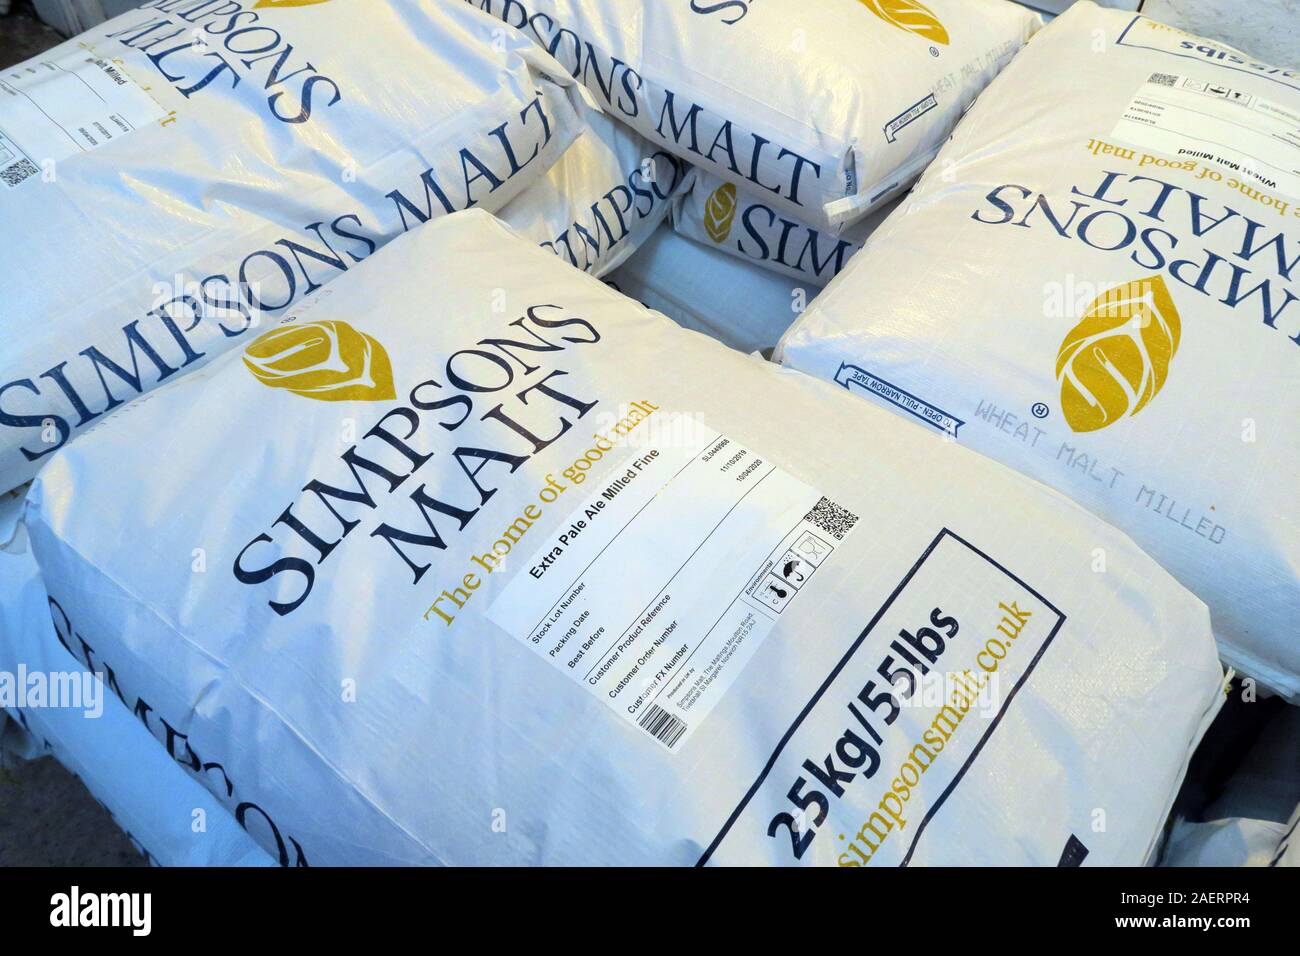 Simpsons malt,for brewing,whisky,spirits,beer and craft ale,Digbeth,Birmingham,B5 5SA Stock Photo